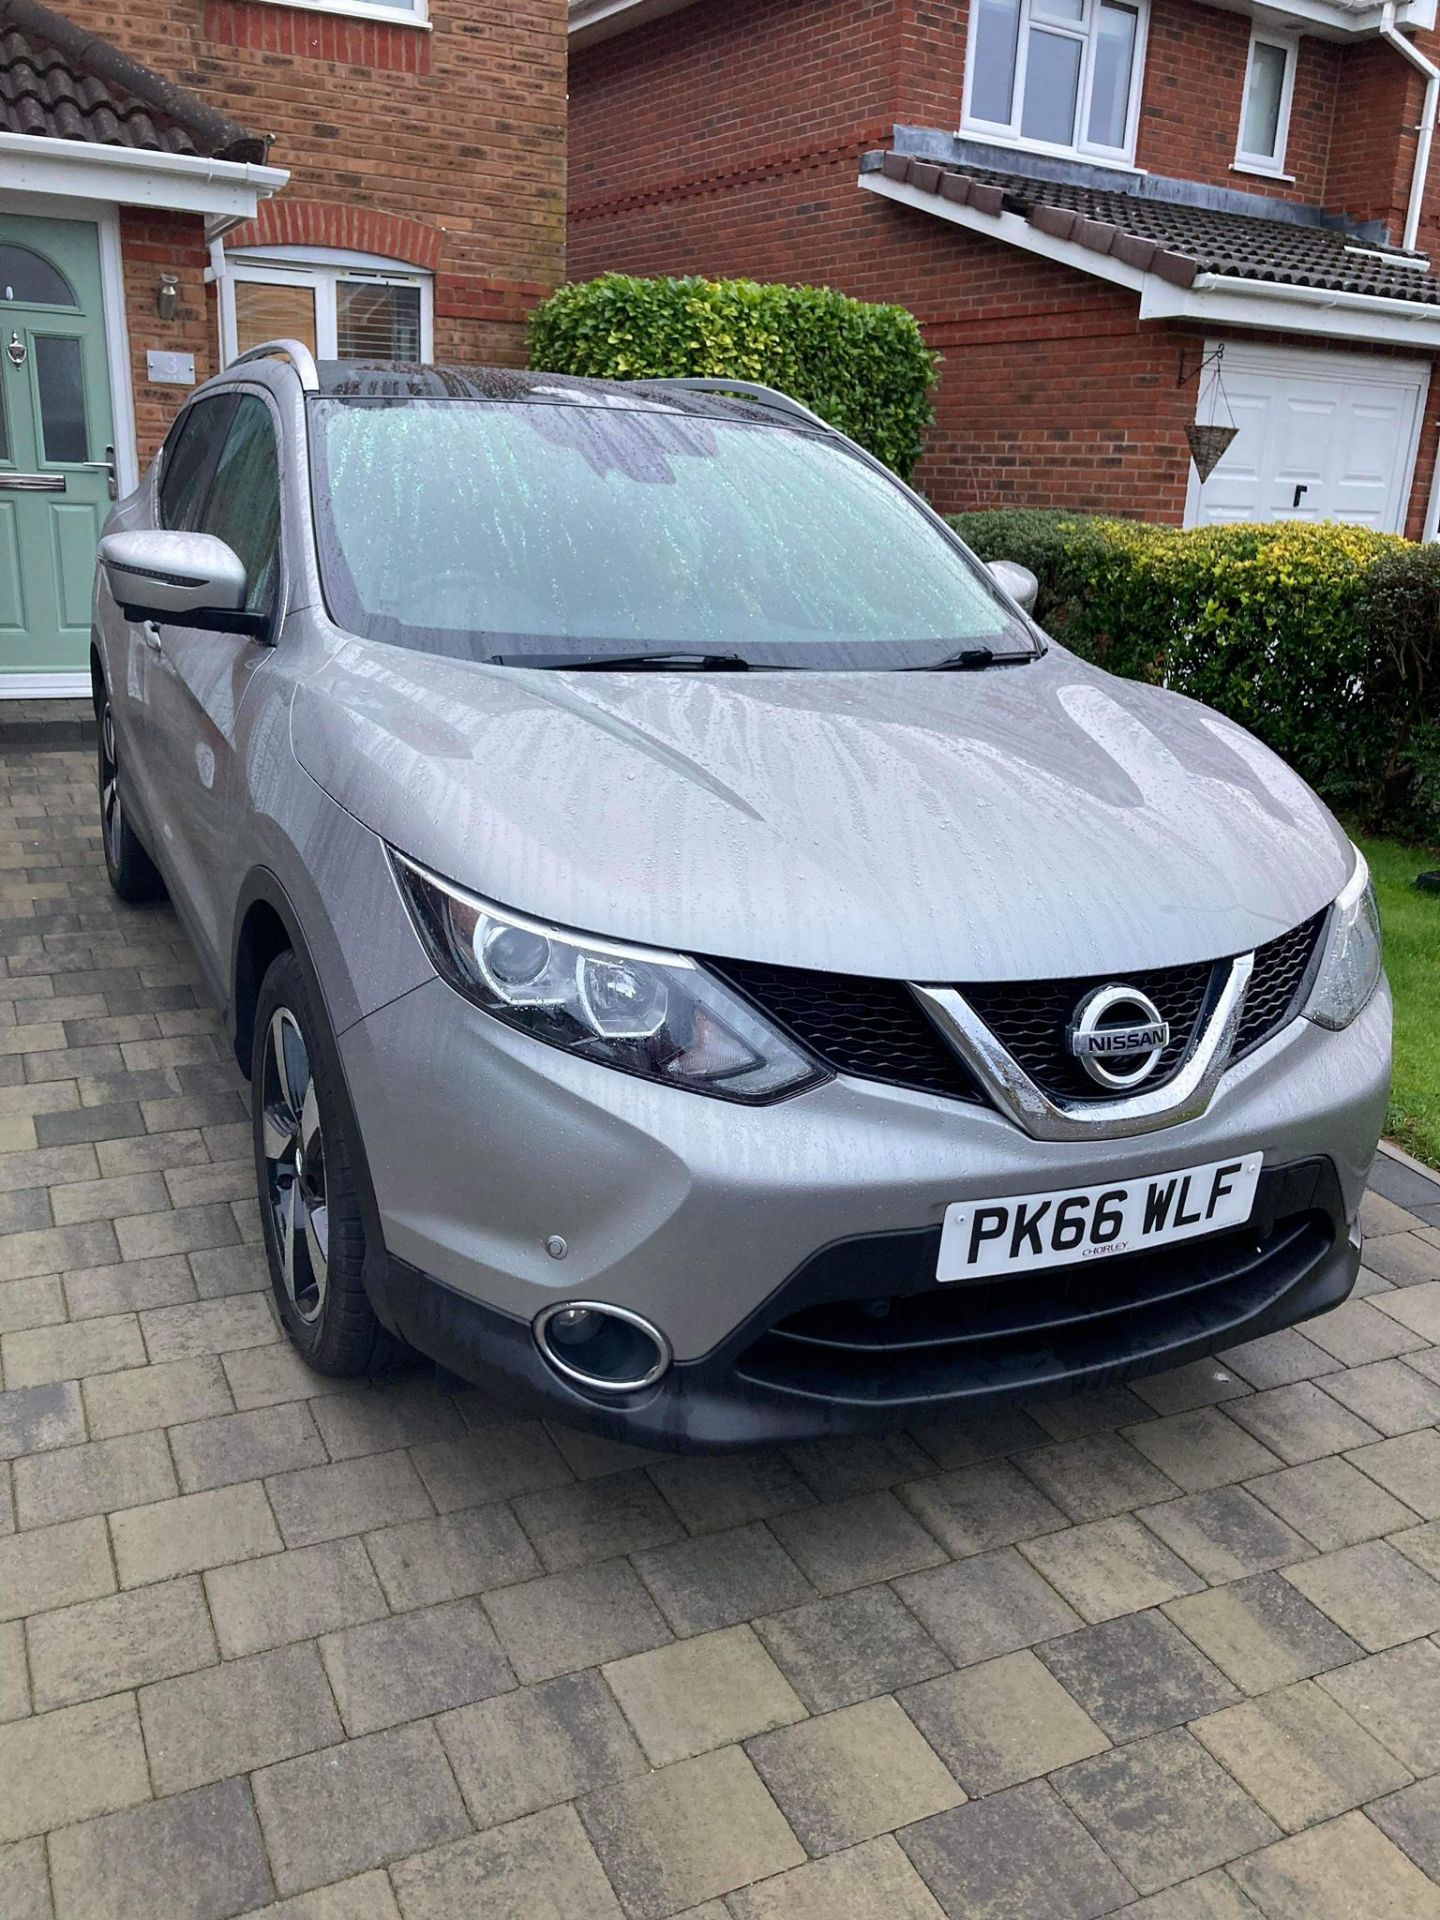 2016 NISSAN QASHQAI N-CONNECTA DIG-T SILVER HATCHBACK, 51,526 MILES WITH FSH *NO VAT* - Image 2 of 10